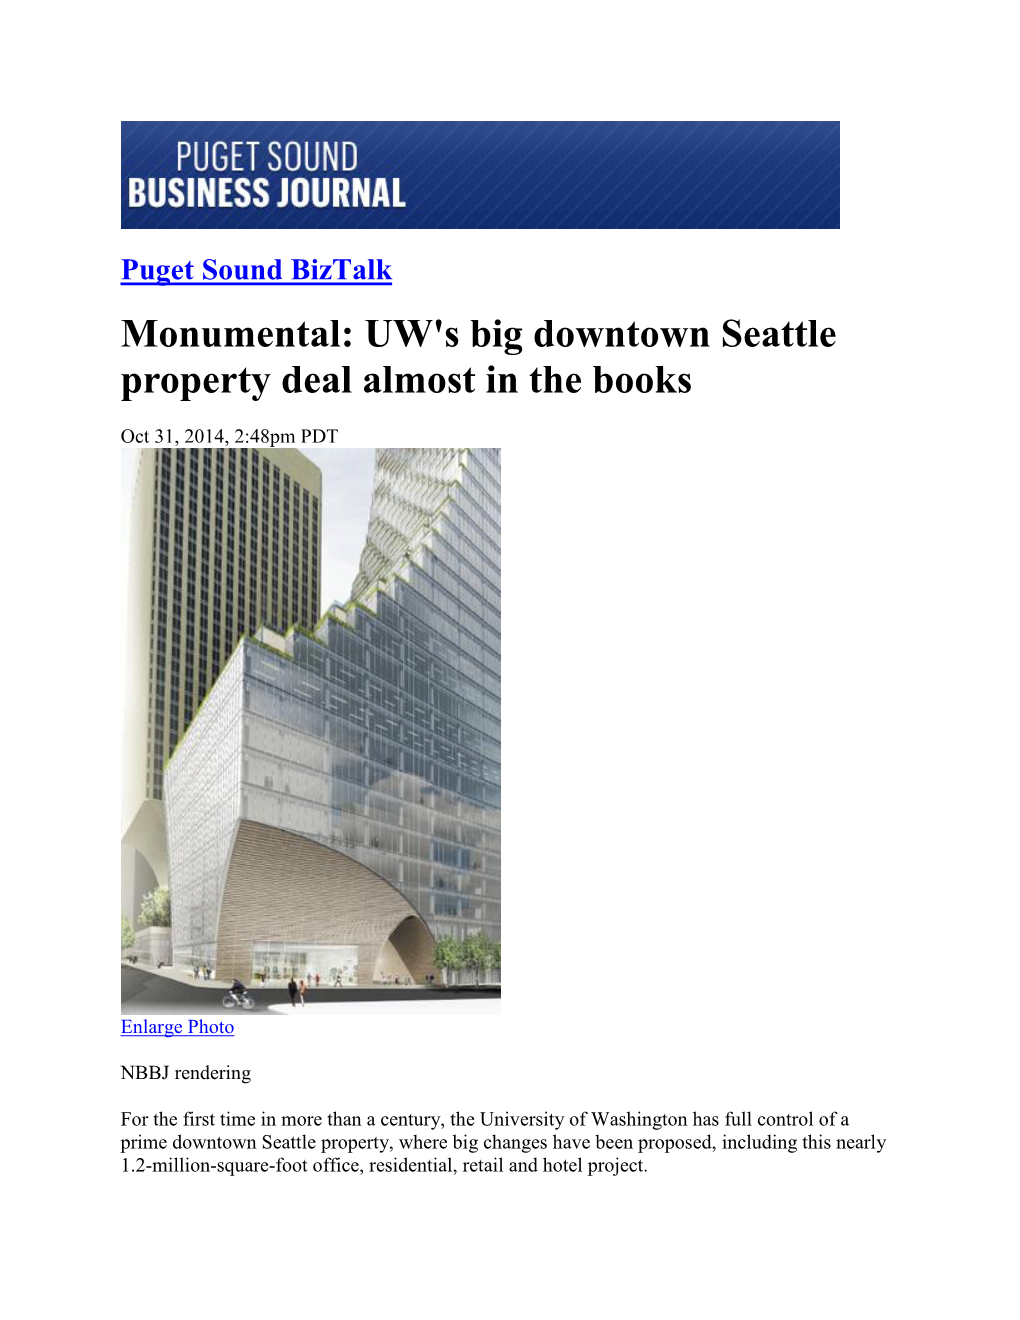 UW's Big Downtown Seattle Property Deal Almost in the Books